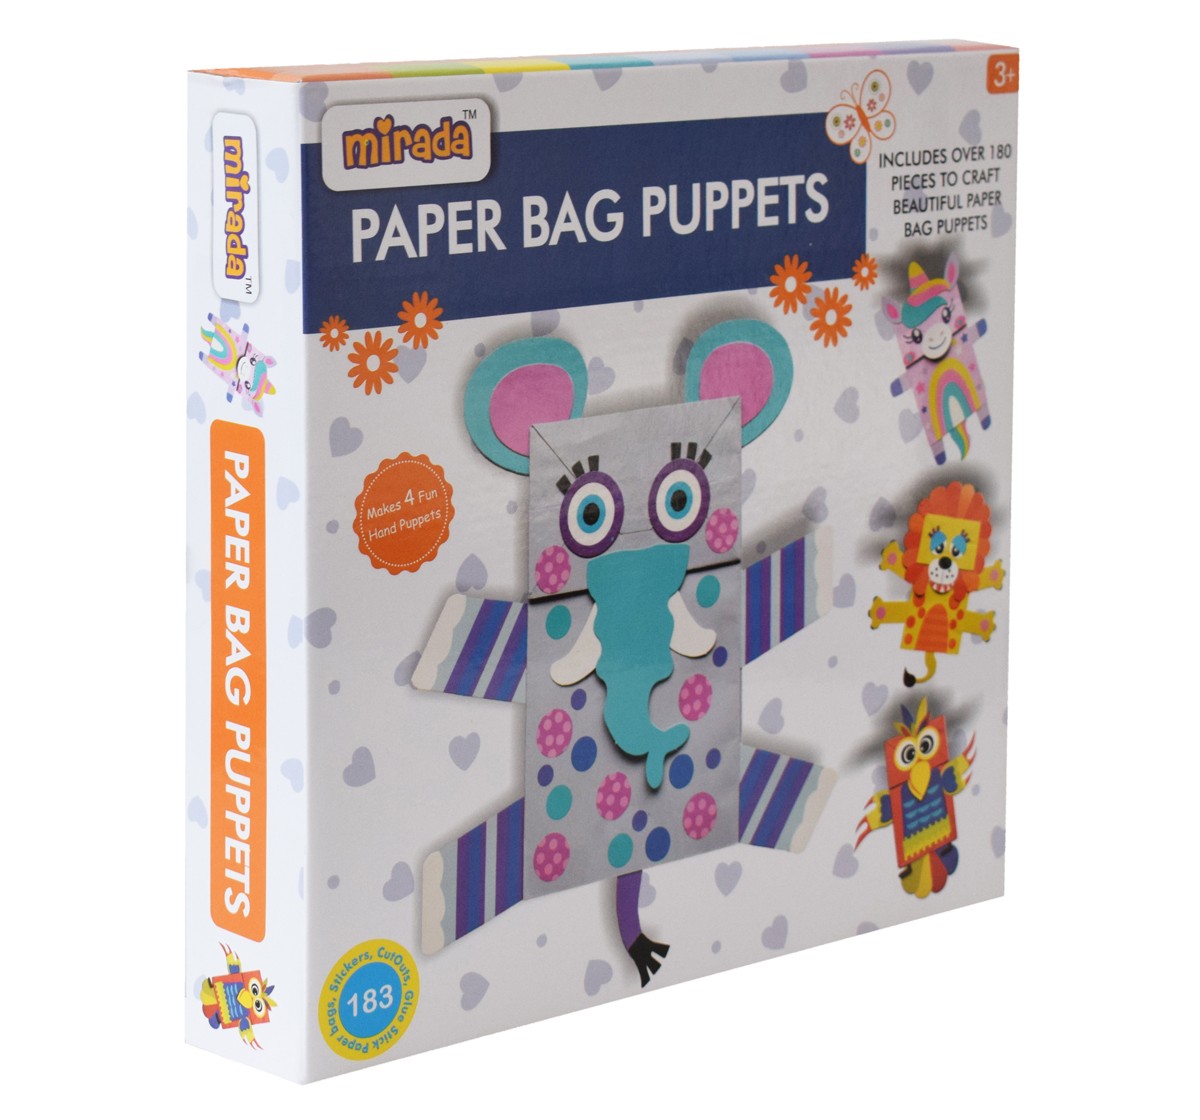 Paper Bag Puppets by Mirada for Kids of, Art and Craft Activity, Multicolor, Includes 4 Paper Bag, 97 Stickers, 81 Cut Outs, 1 Glue Stick